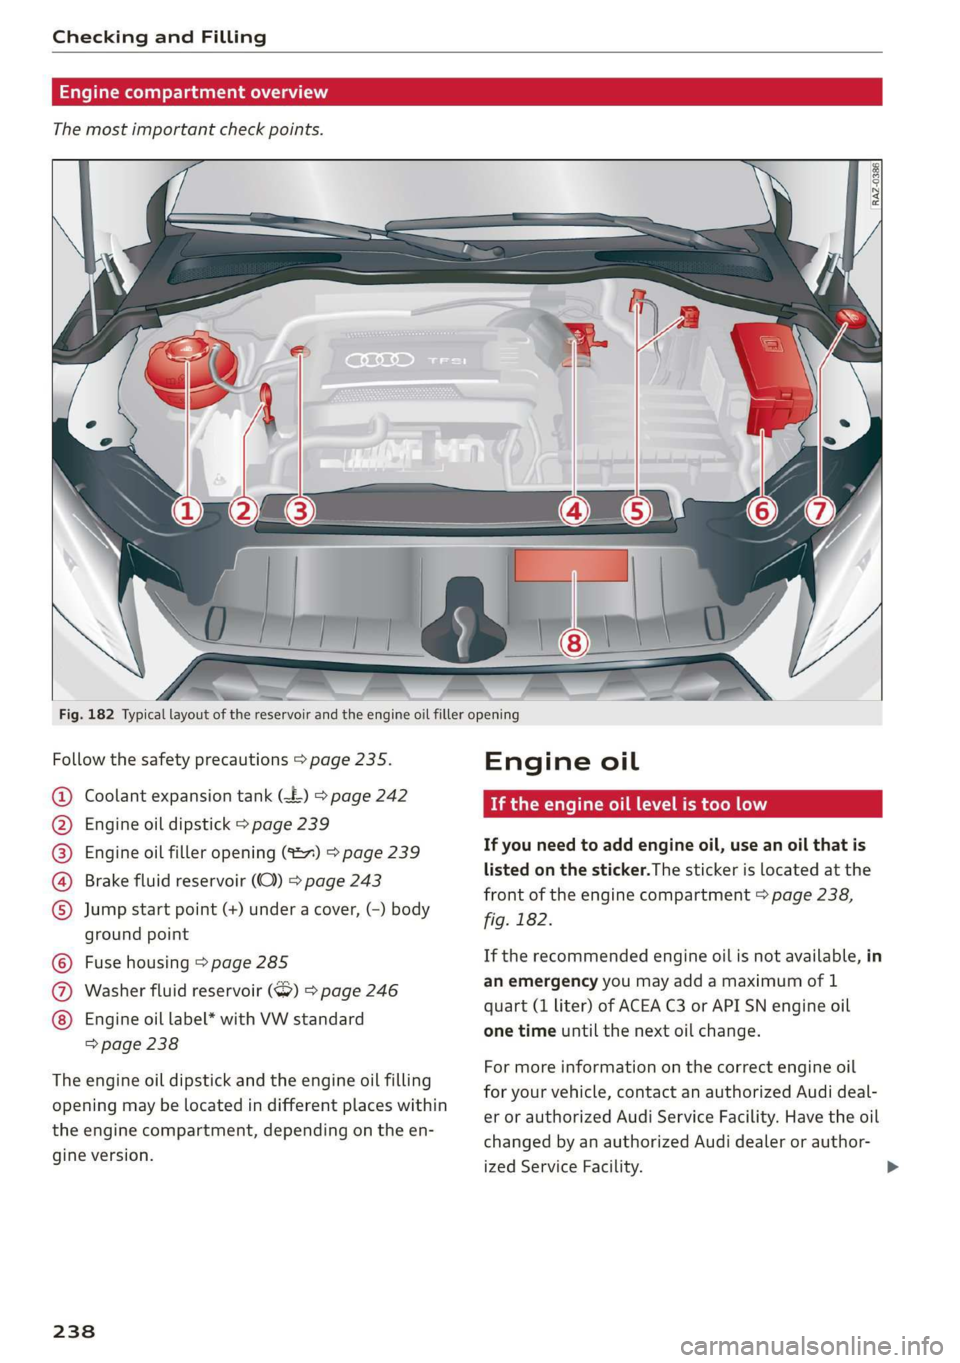 AUDI TT COUPE 2019  Owners Manual CheckingandFilling
 
 Enginecompartmentoverview
Themostimportantcheckpoints.
 
 
g§|
a @
 
  
Fig.182Typicallayoutof thereservoirandtheengineoilfilleropening
Followthesafetyprecautions>page235.
Coola